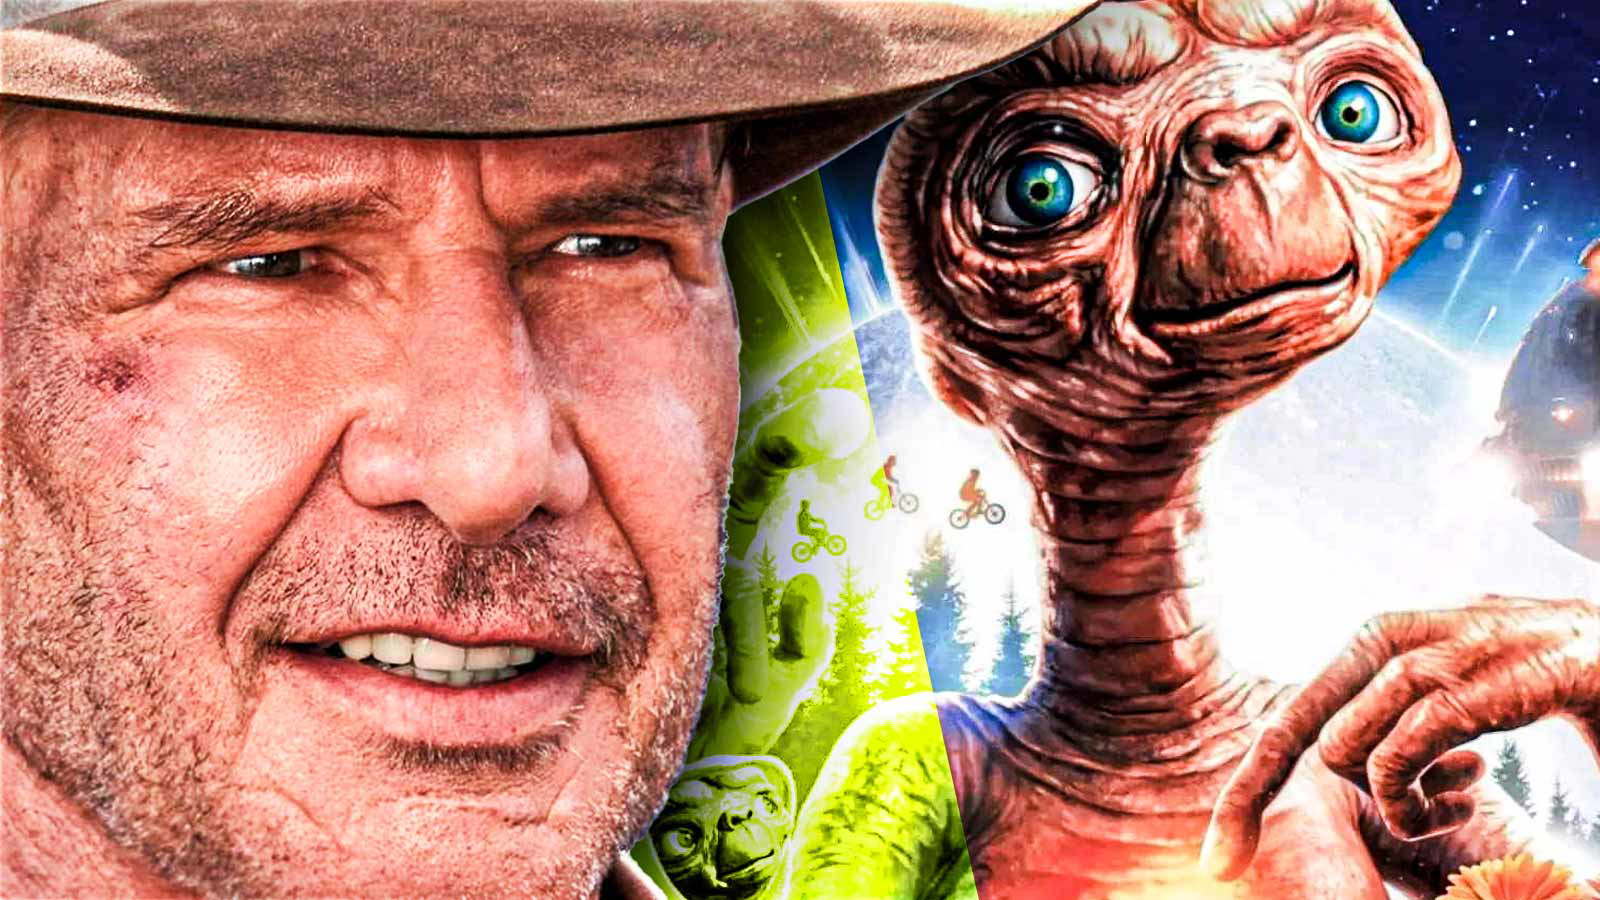 “Your girlfriend turned me down!”: Steven Spielberg’s ‘E.T.’ Story Made Harrison Ford’s Girlfriend Pass Out in the Middle of a Desert